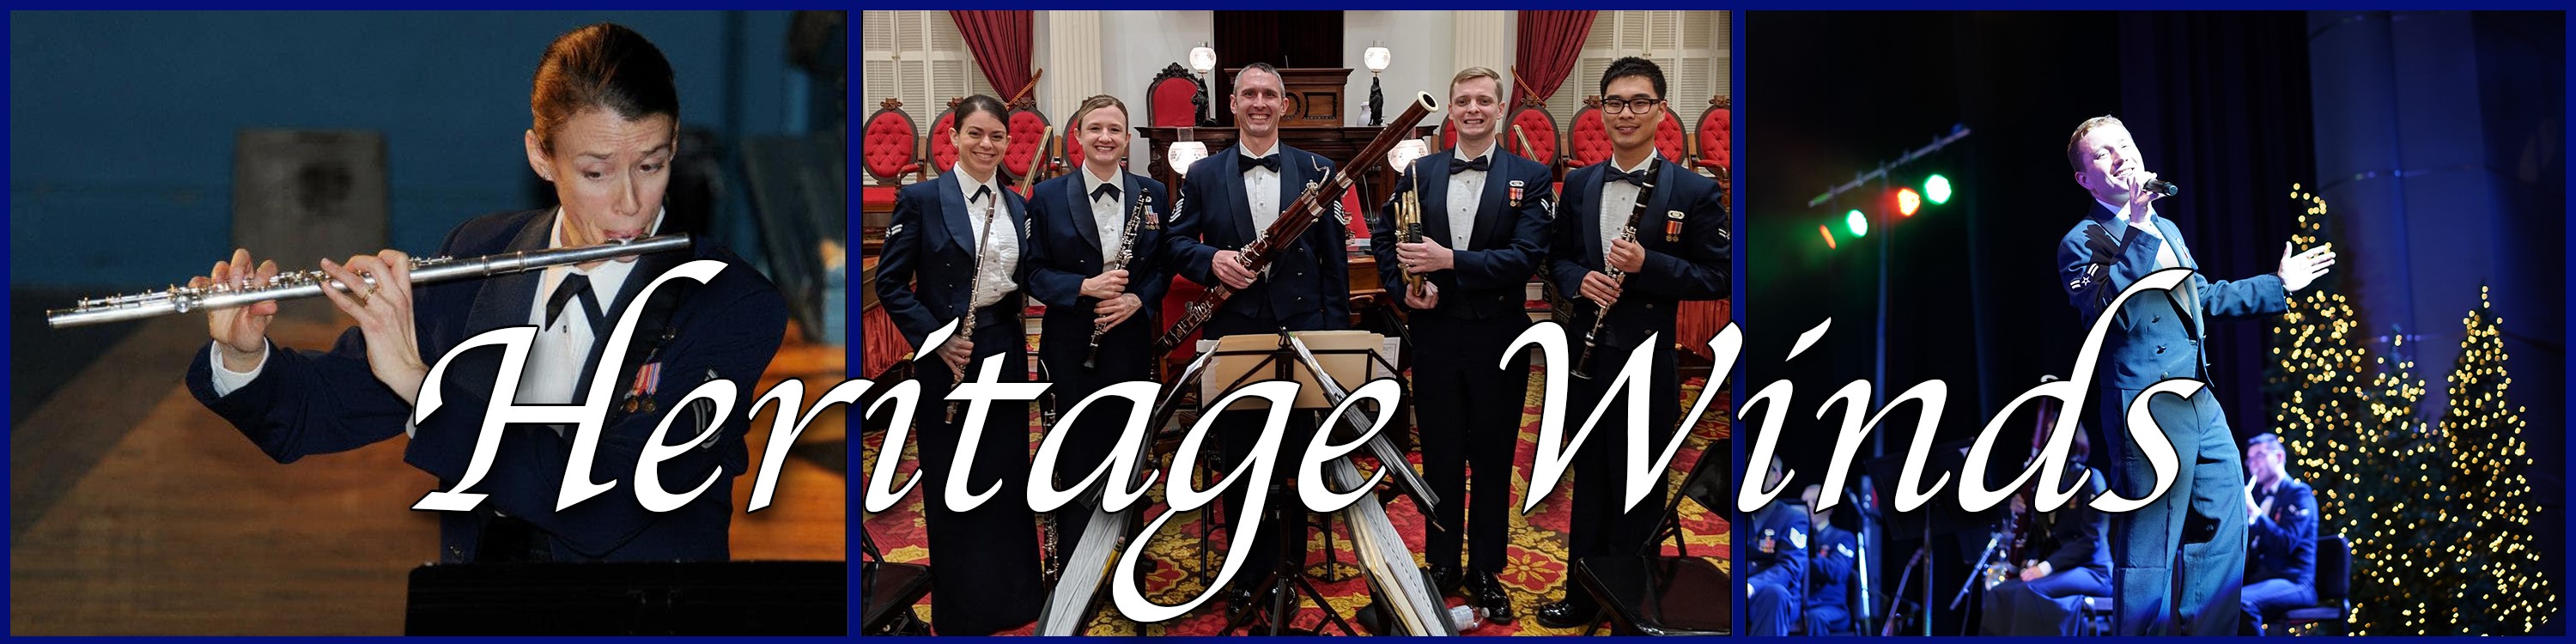 A three-part graphic created to show three scenes of the Heritage Winds. There is a blue border around the outside and between the images. On the left a flue player performs on a wood stage in dark blue mess dress, in the center te full quintet poses with their instruments in blue mess dress, in a room full of white walls and red chairs, and on the right a vocalist sings on stage flanked on either side in the background by wind players or twinkling holiday trees. White text above them all reads "Heritage Winds" in italics.